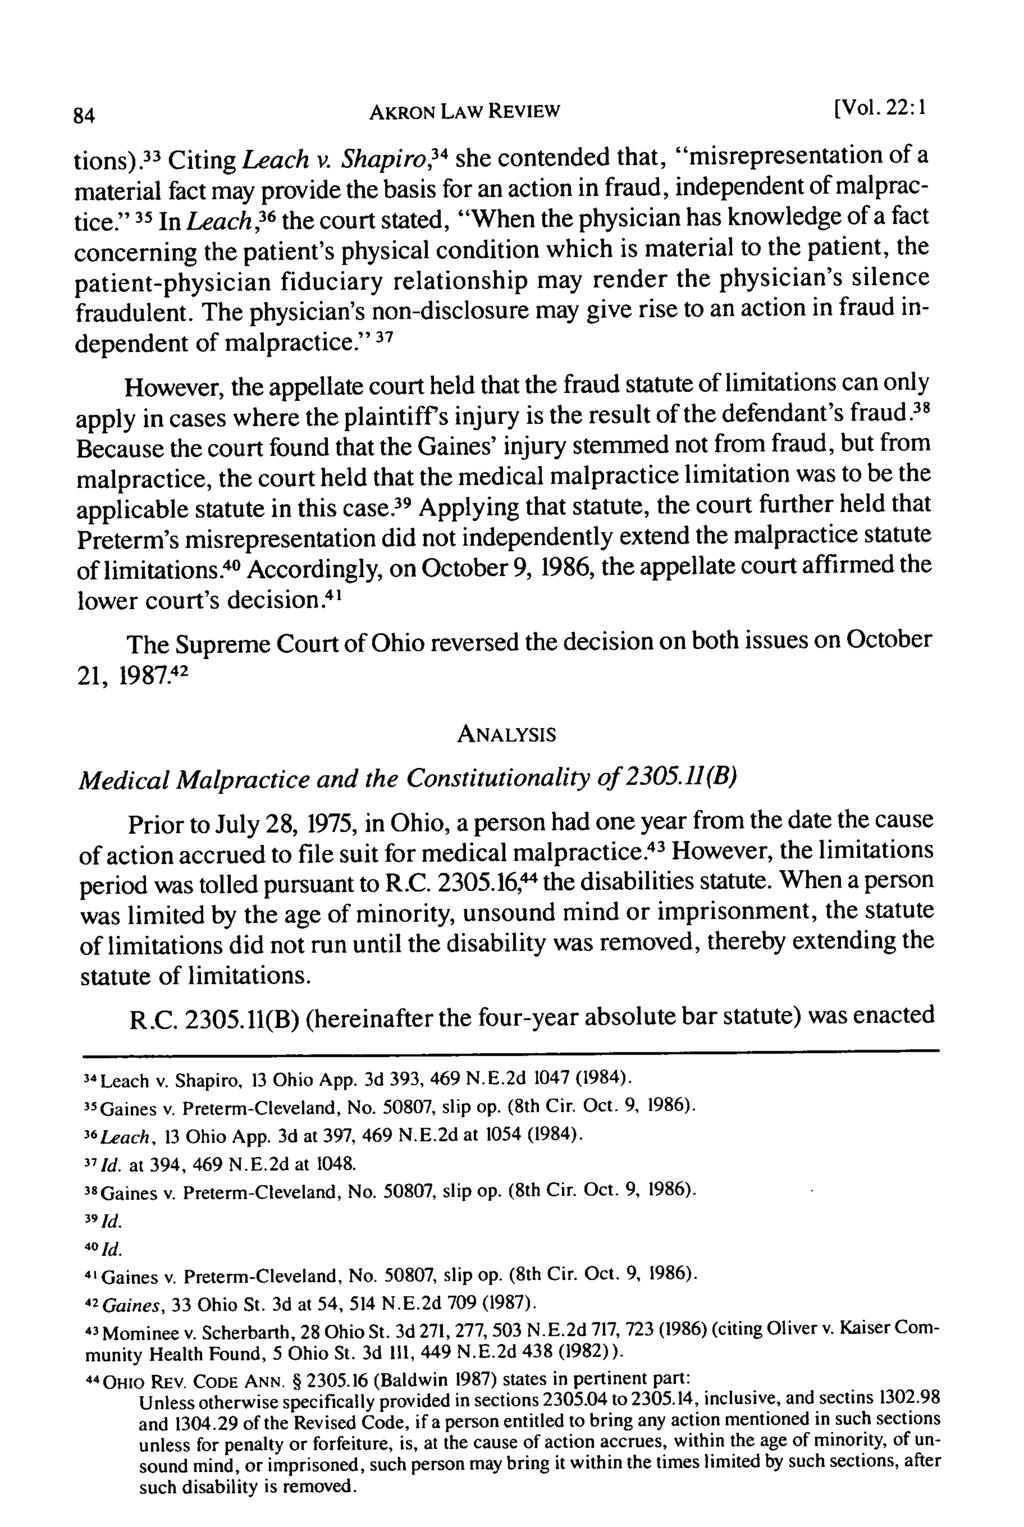 tions). 33 Citing Leach v. Shapiro, 34 she contended that, "misrepresentation of a material fact may provide the basis for an action in fraud, independent of malpractice.